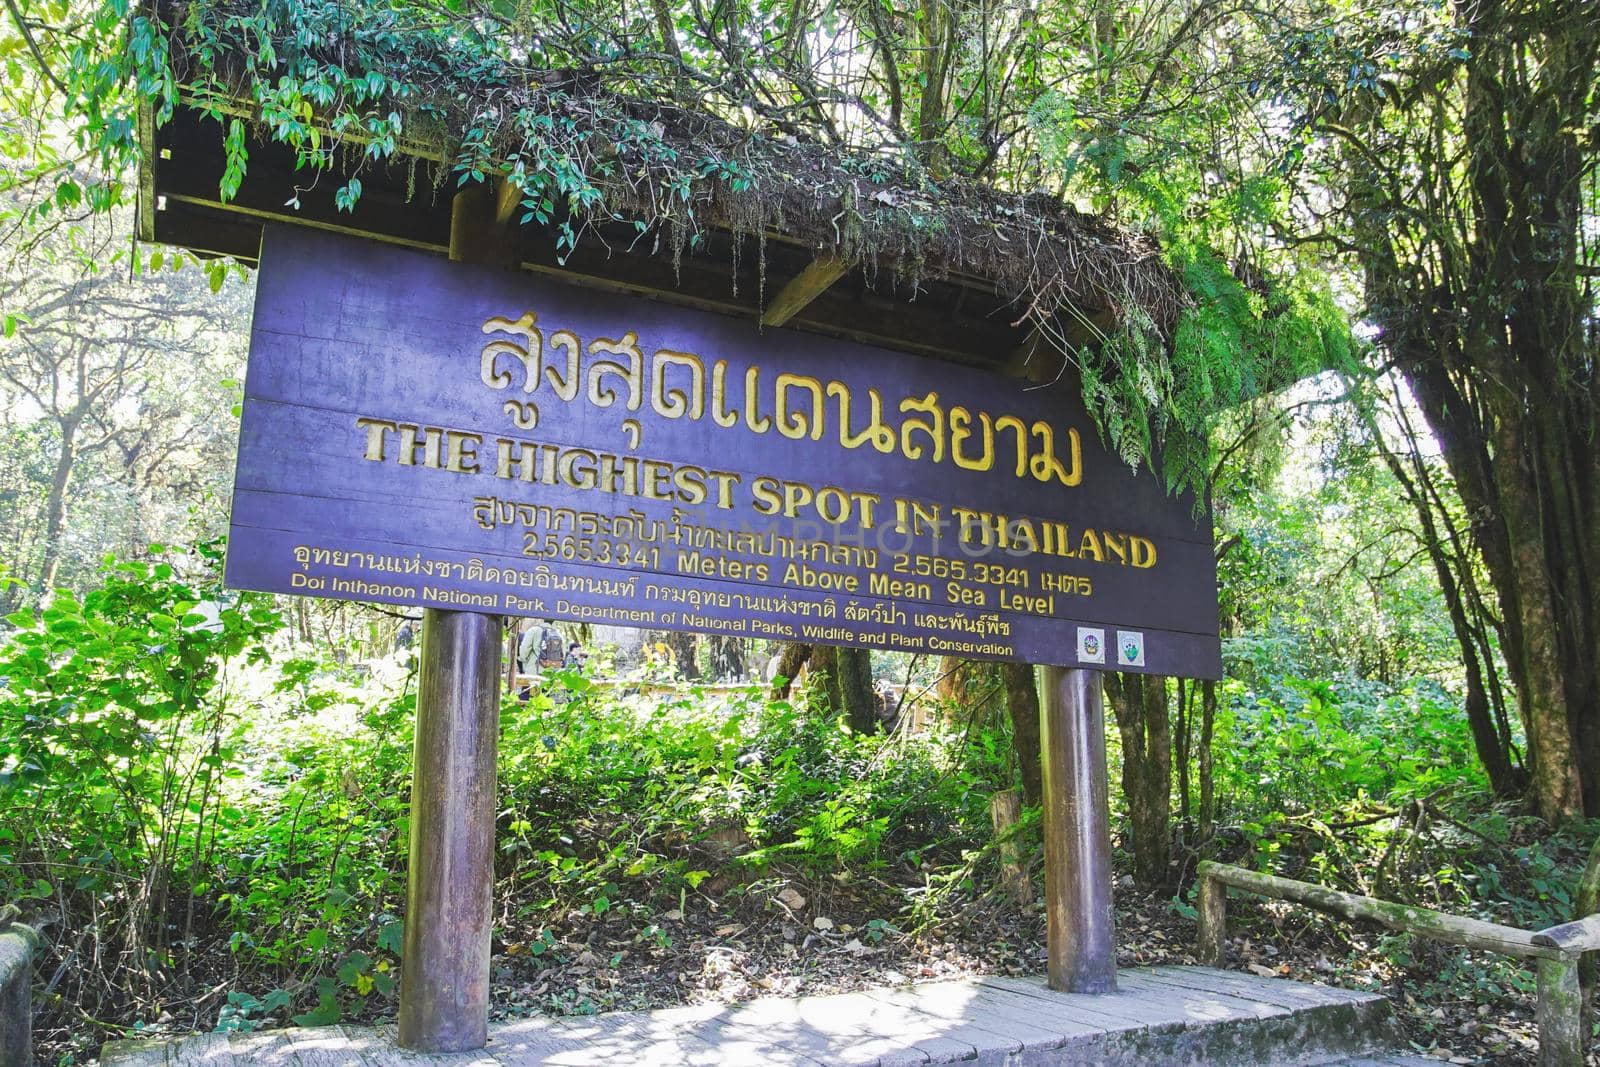 The highest spot in Thailand sign at Doi Inthanon National Park, Chiang mai, Thailand. 2,565.3341 Meters above mean sea level. (Translation:The highest spot in Thailand)